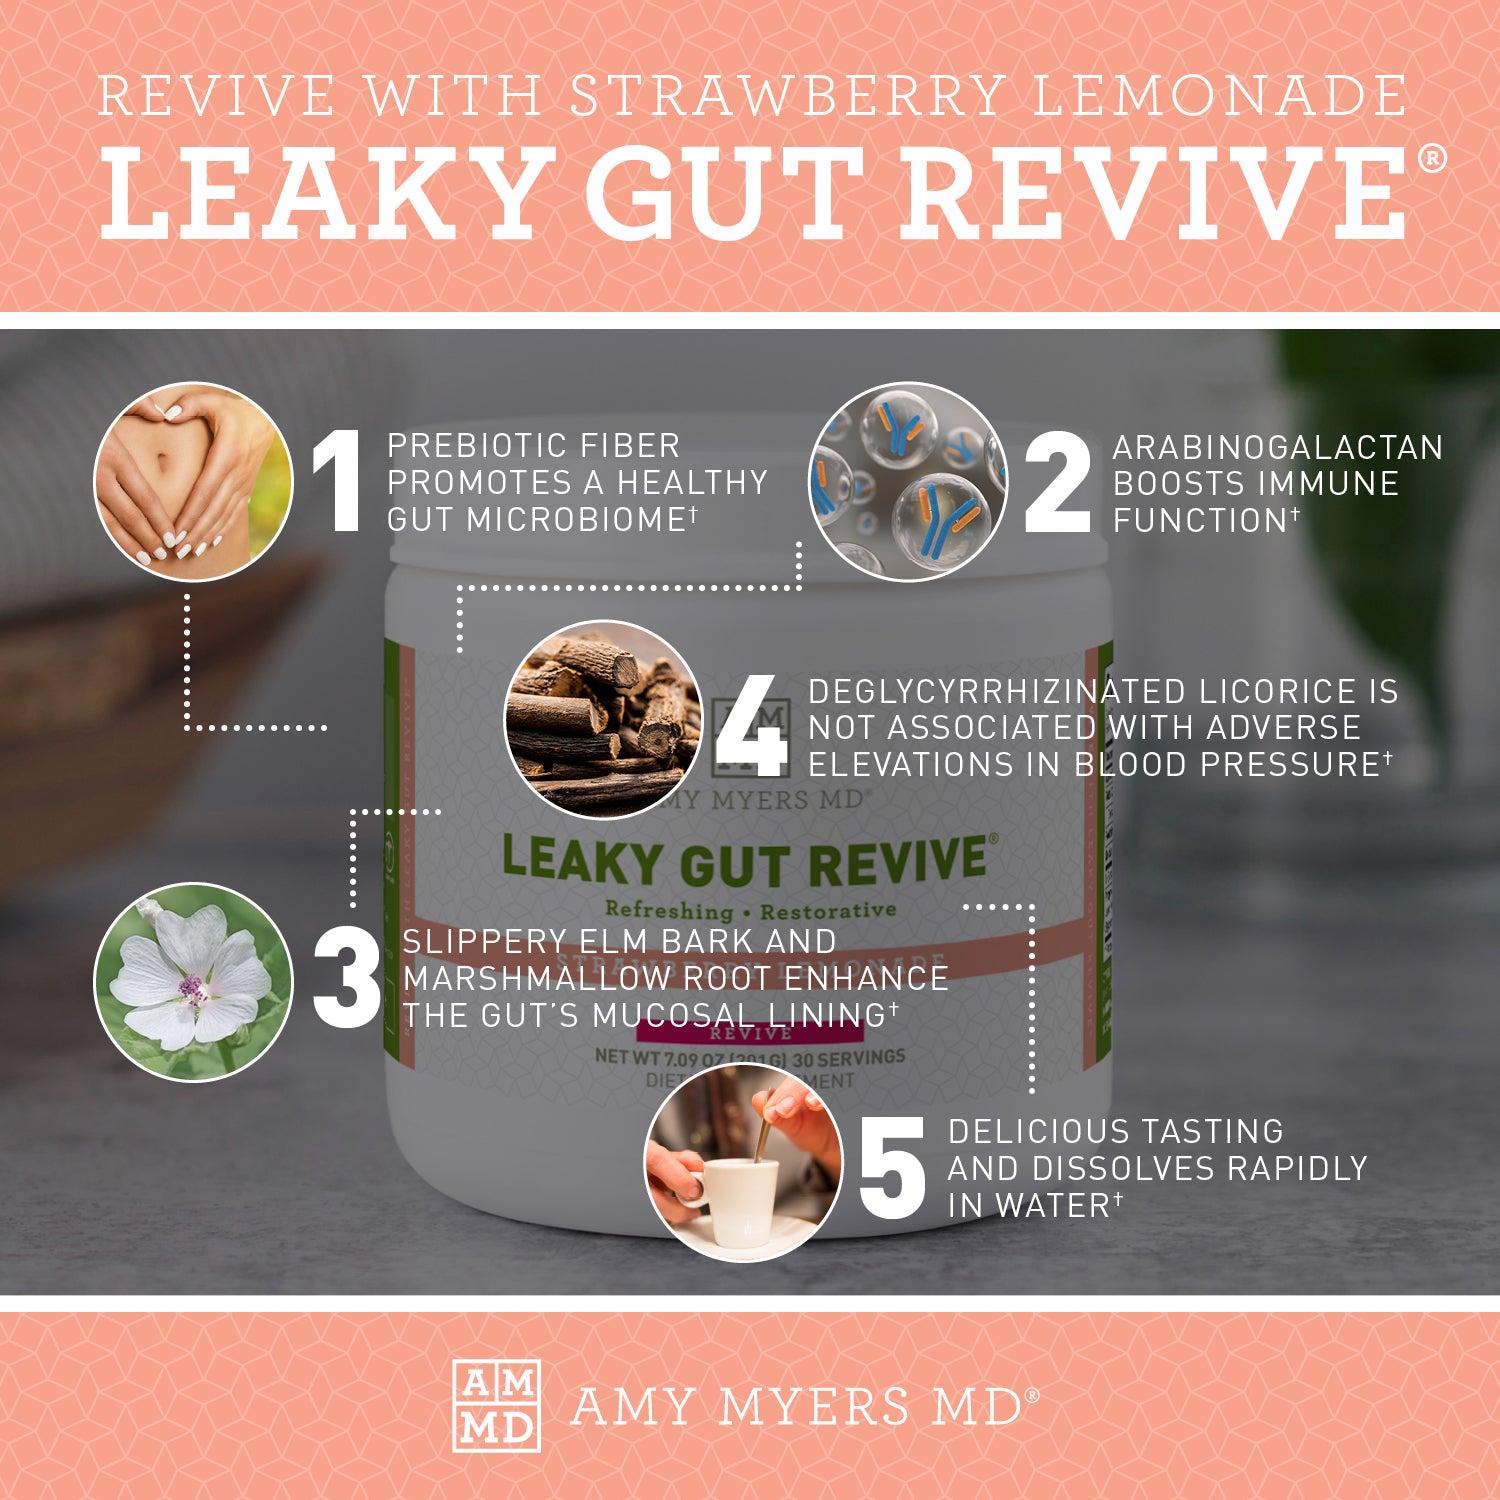 Revive with Strawberry Lemonade Leaky Gut Revive®